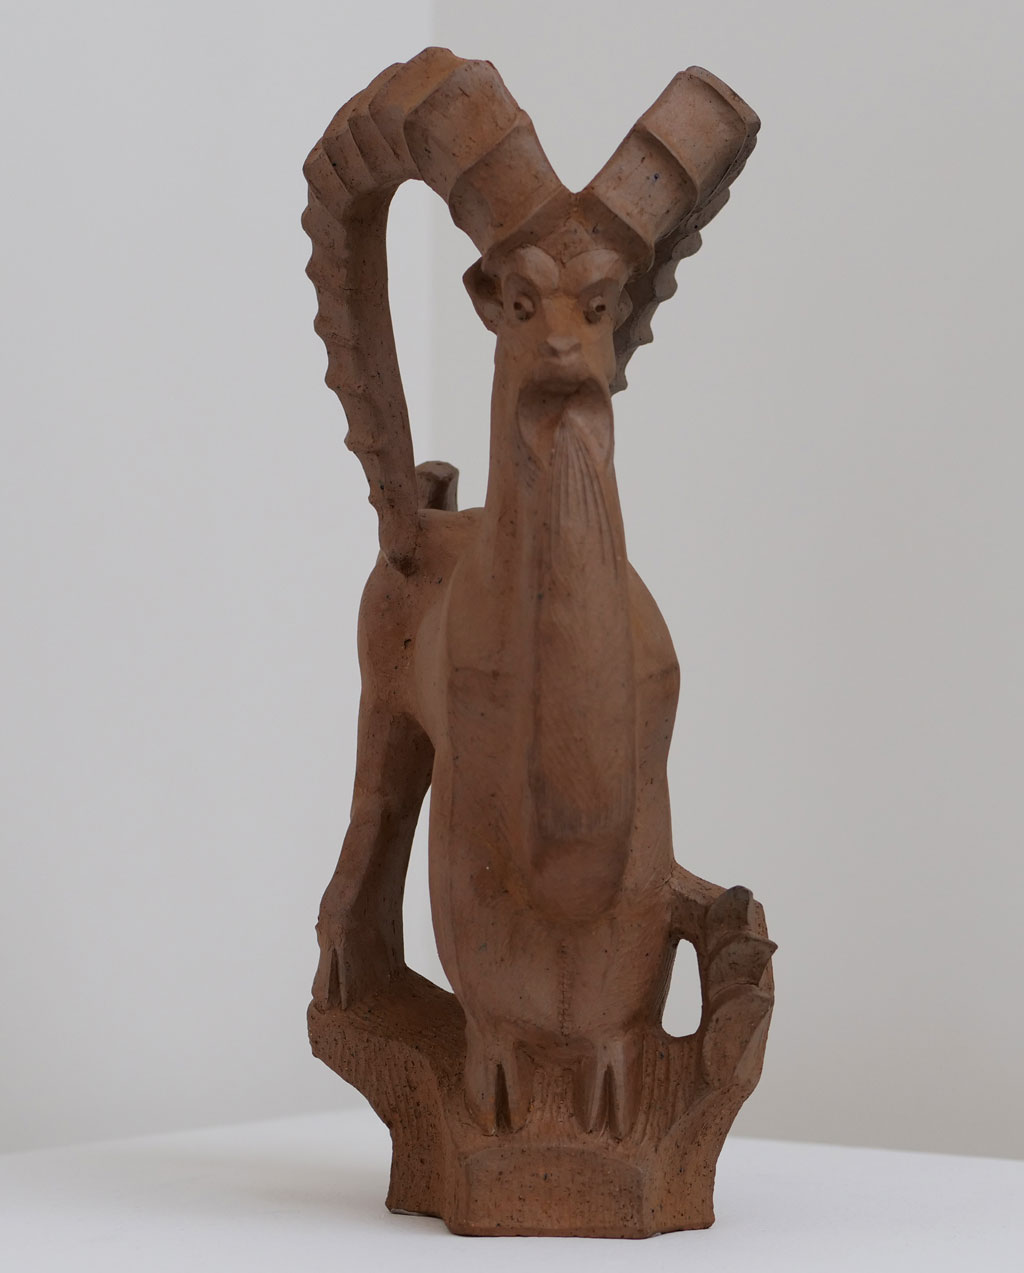 Betty Davenport Ford, Antelope, c. 1950, California Visionaries: Seminal Studio Craft, Featuring Works from the Forrest L. Merrill Collection. Craft in America Center exhibition